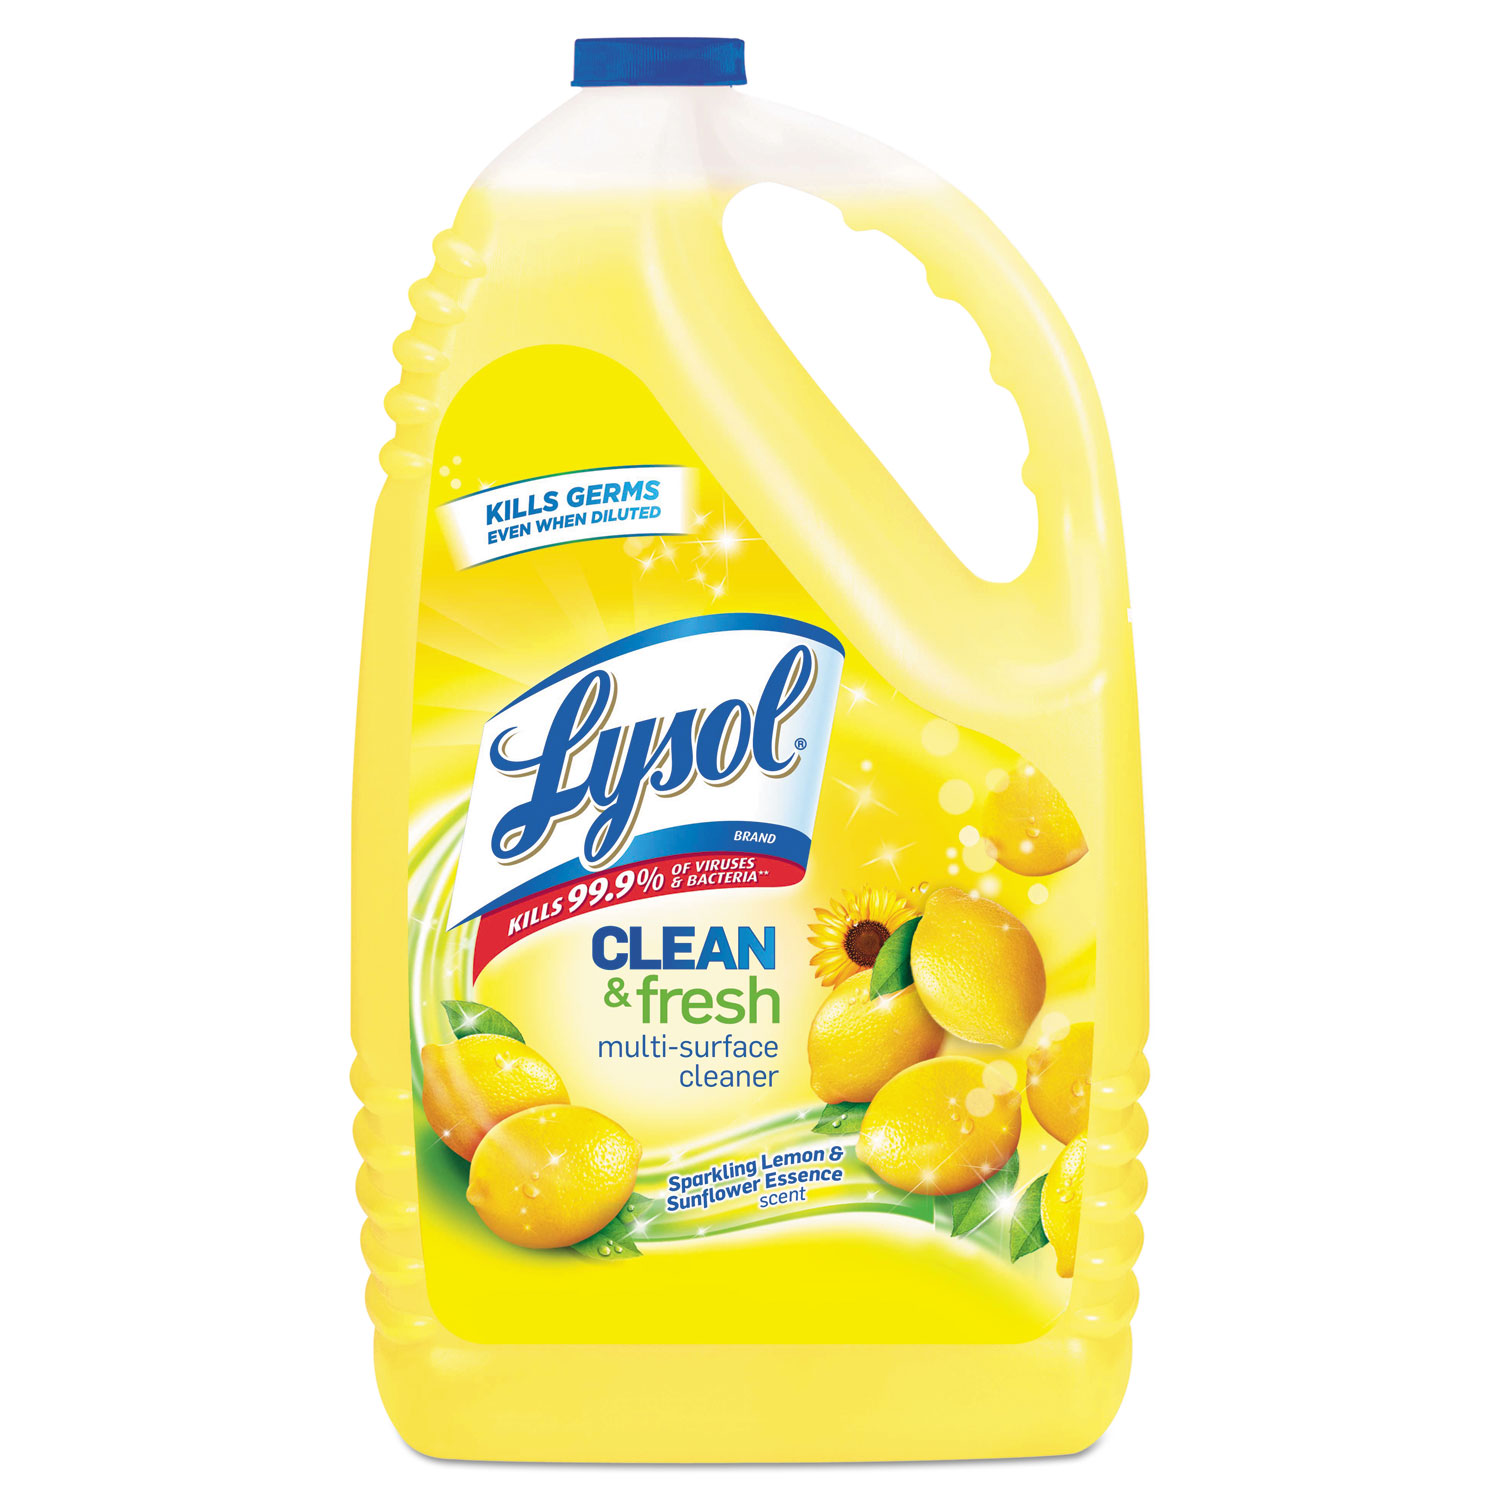  LYSOL Brand 36241-77617 Clean and Fresh Multi-Surface Cleaner, Sparkling Lemon and Sunflower Essence, 144 oz Bottle (RAC77617EA) 